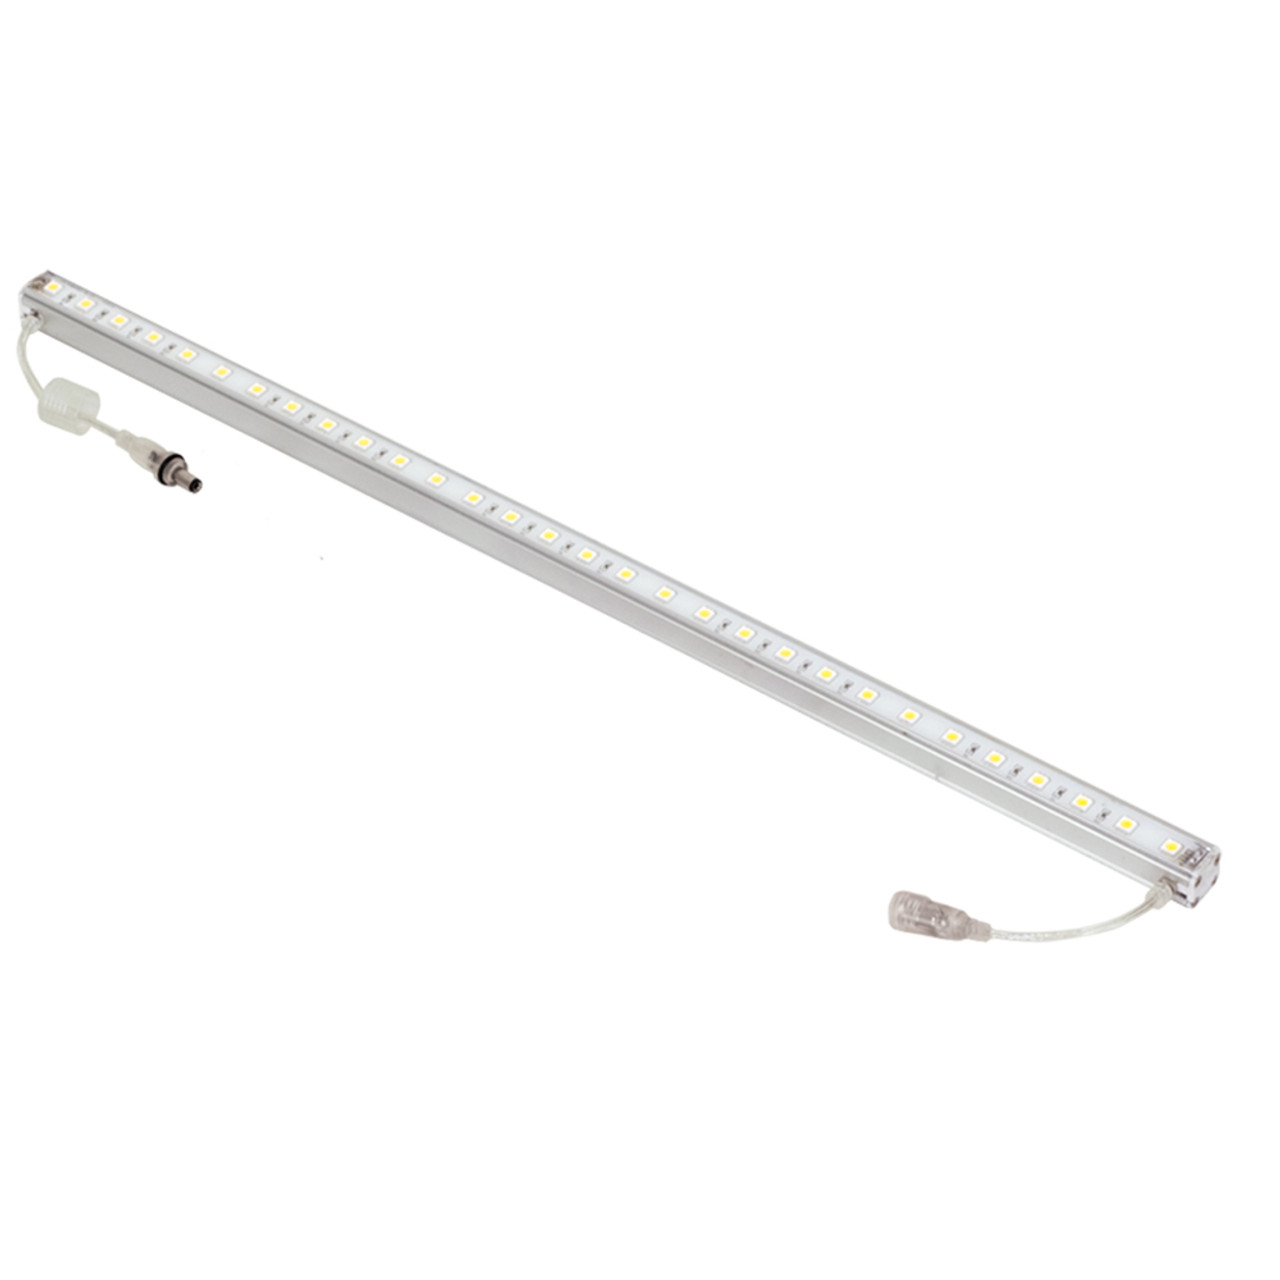 JESCO Lighting DL-RS-24-40 6.4W Dimmable linear LED fixture for wet,damp and dry locations. Aluminium extruded housing. , 4000K-4200K